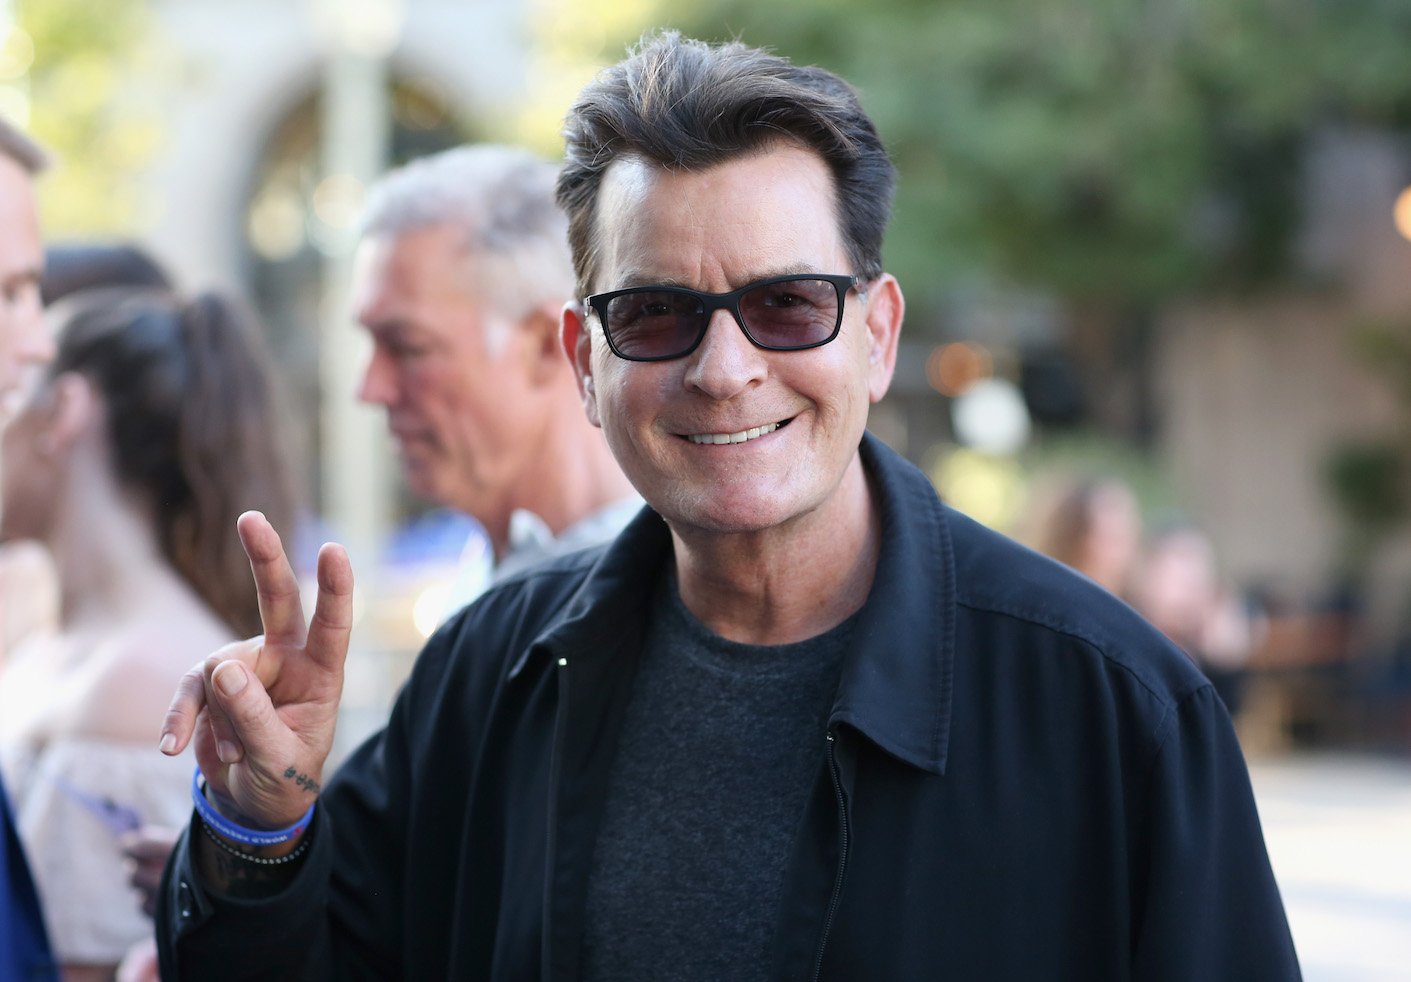 Charlie Sheen smiling while wearing sunglasses and holding up a peace sign with his fingers